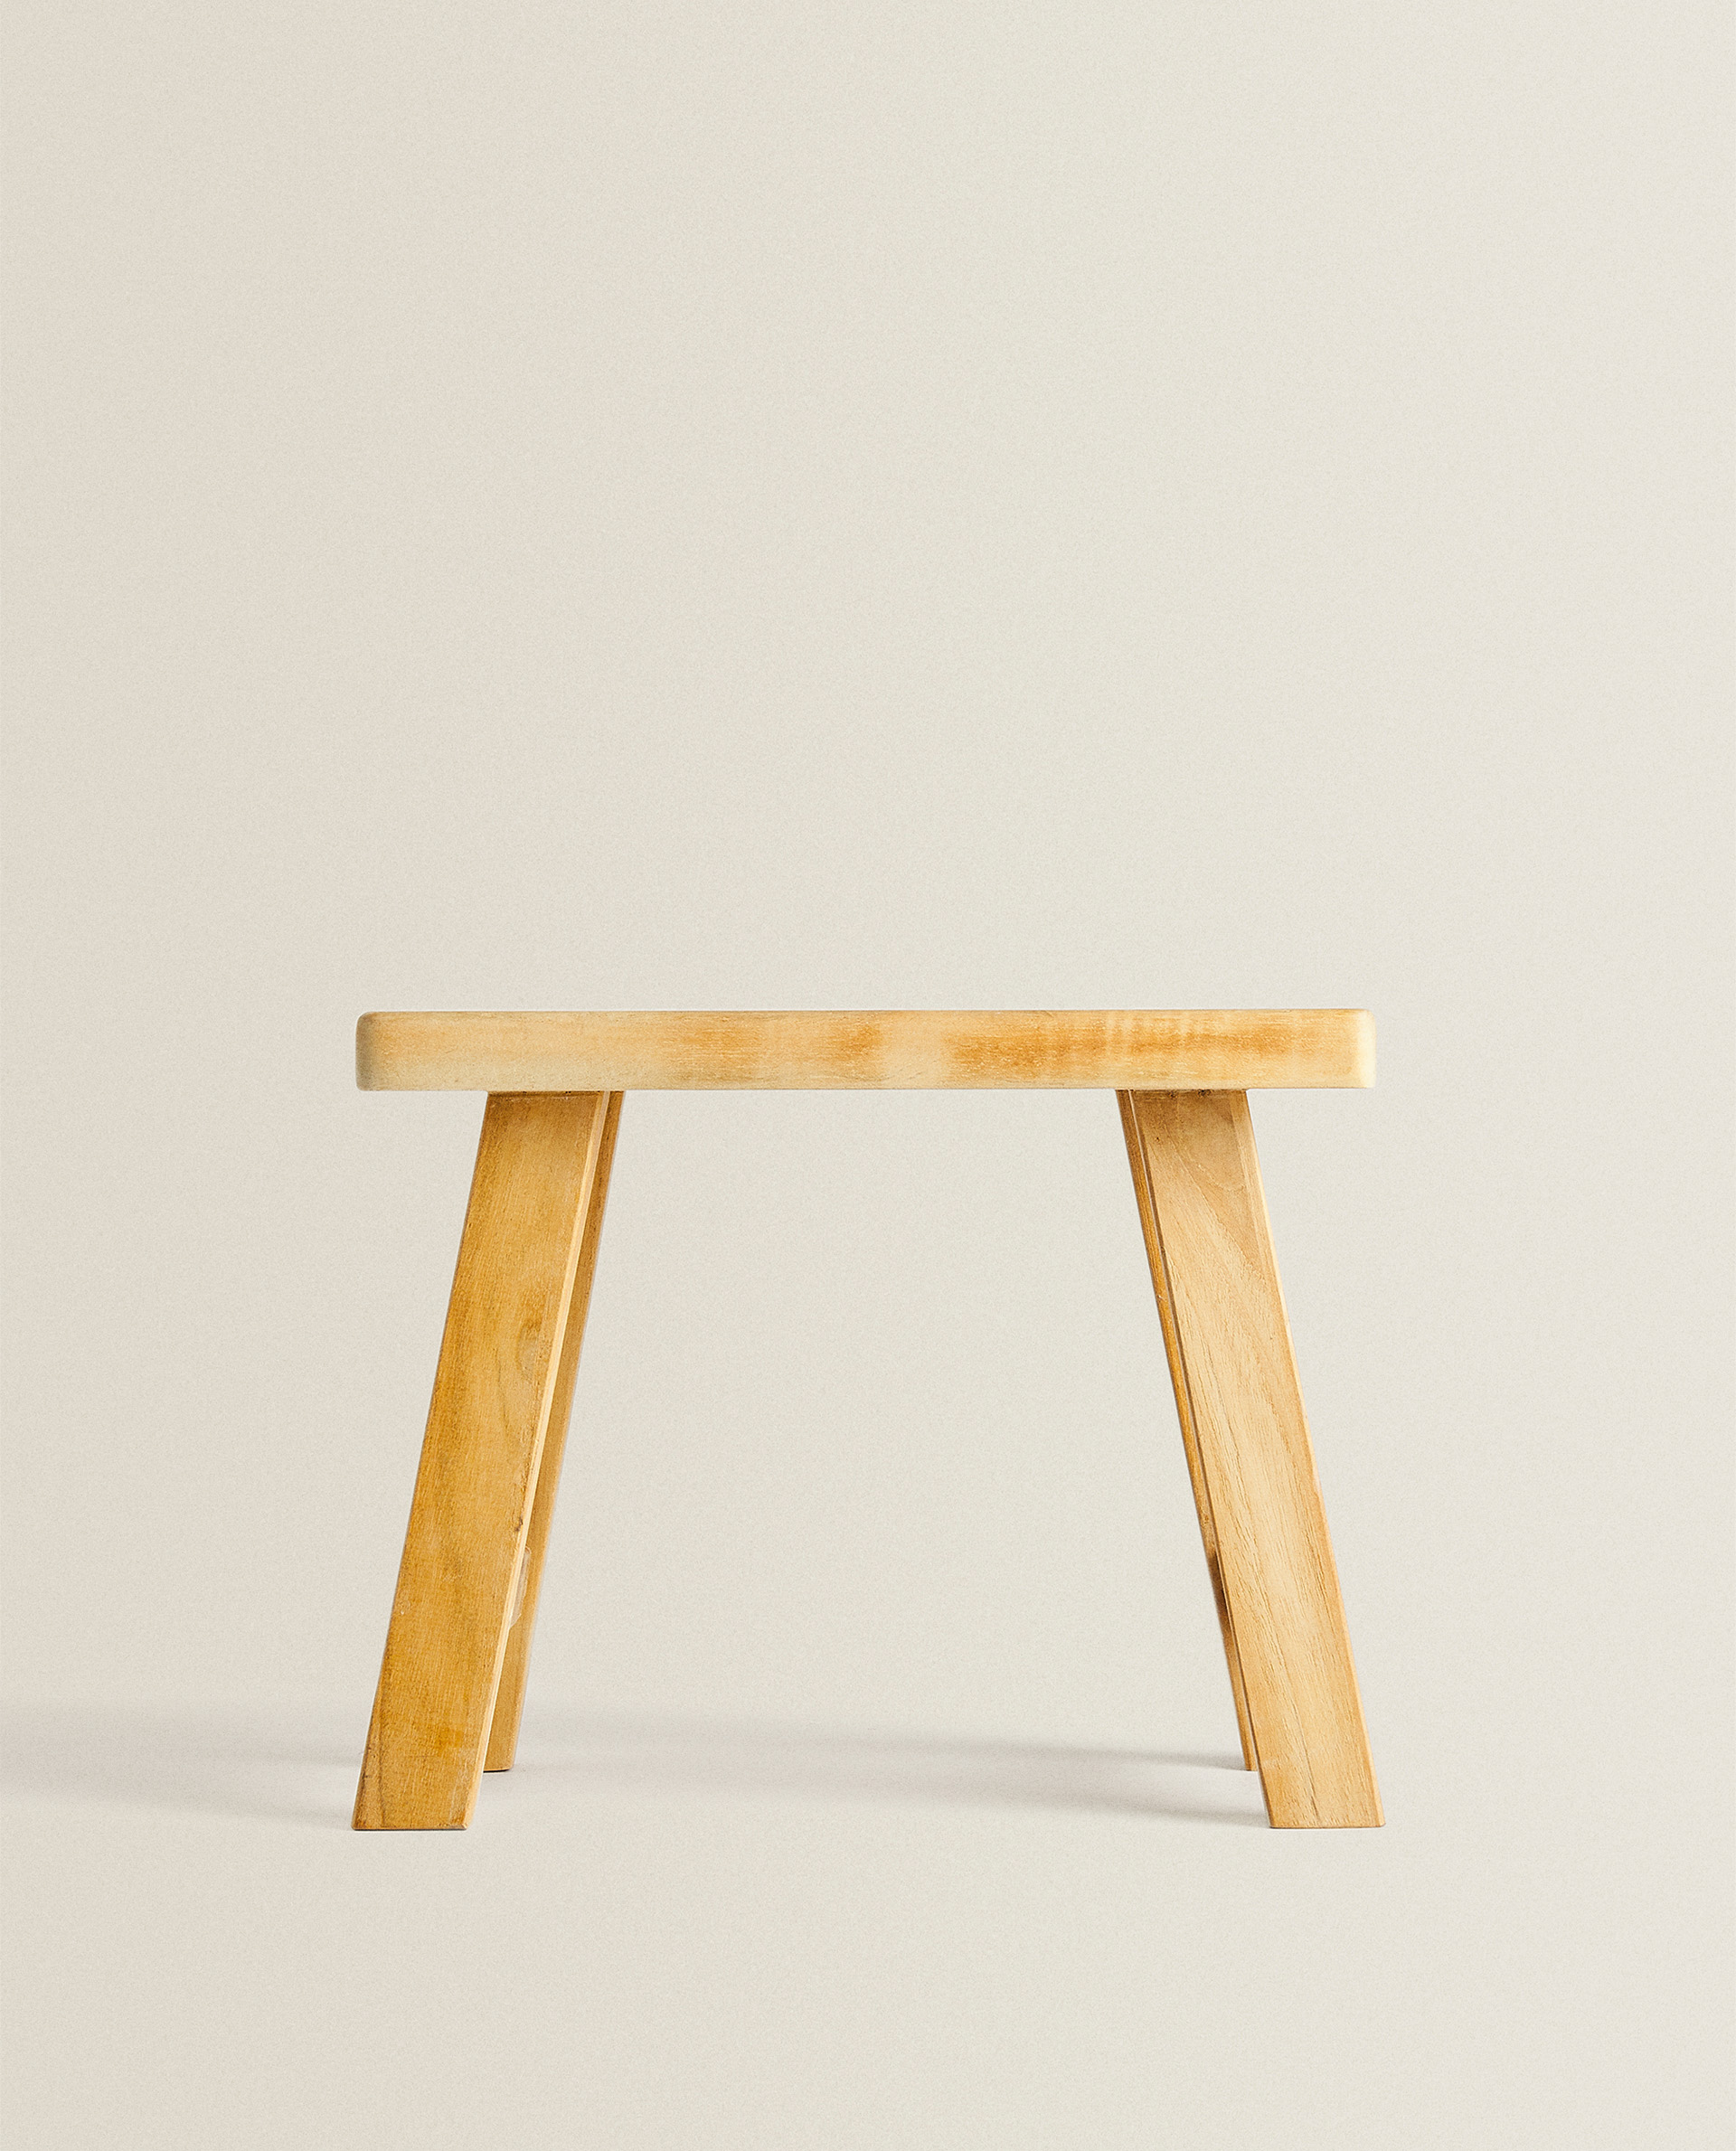 small wooden stool